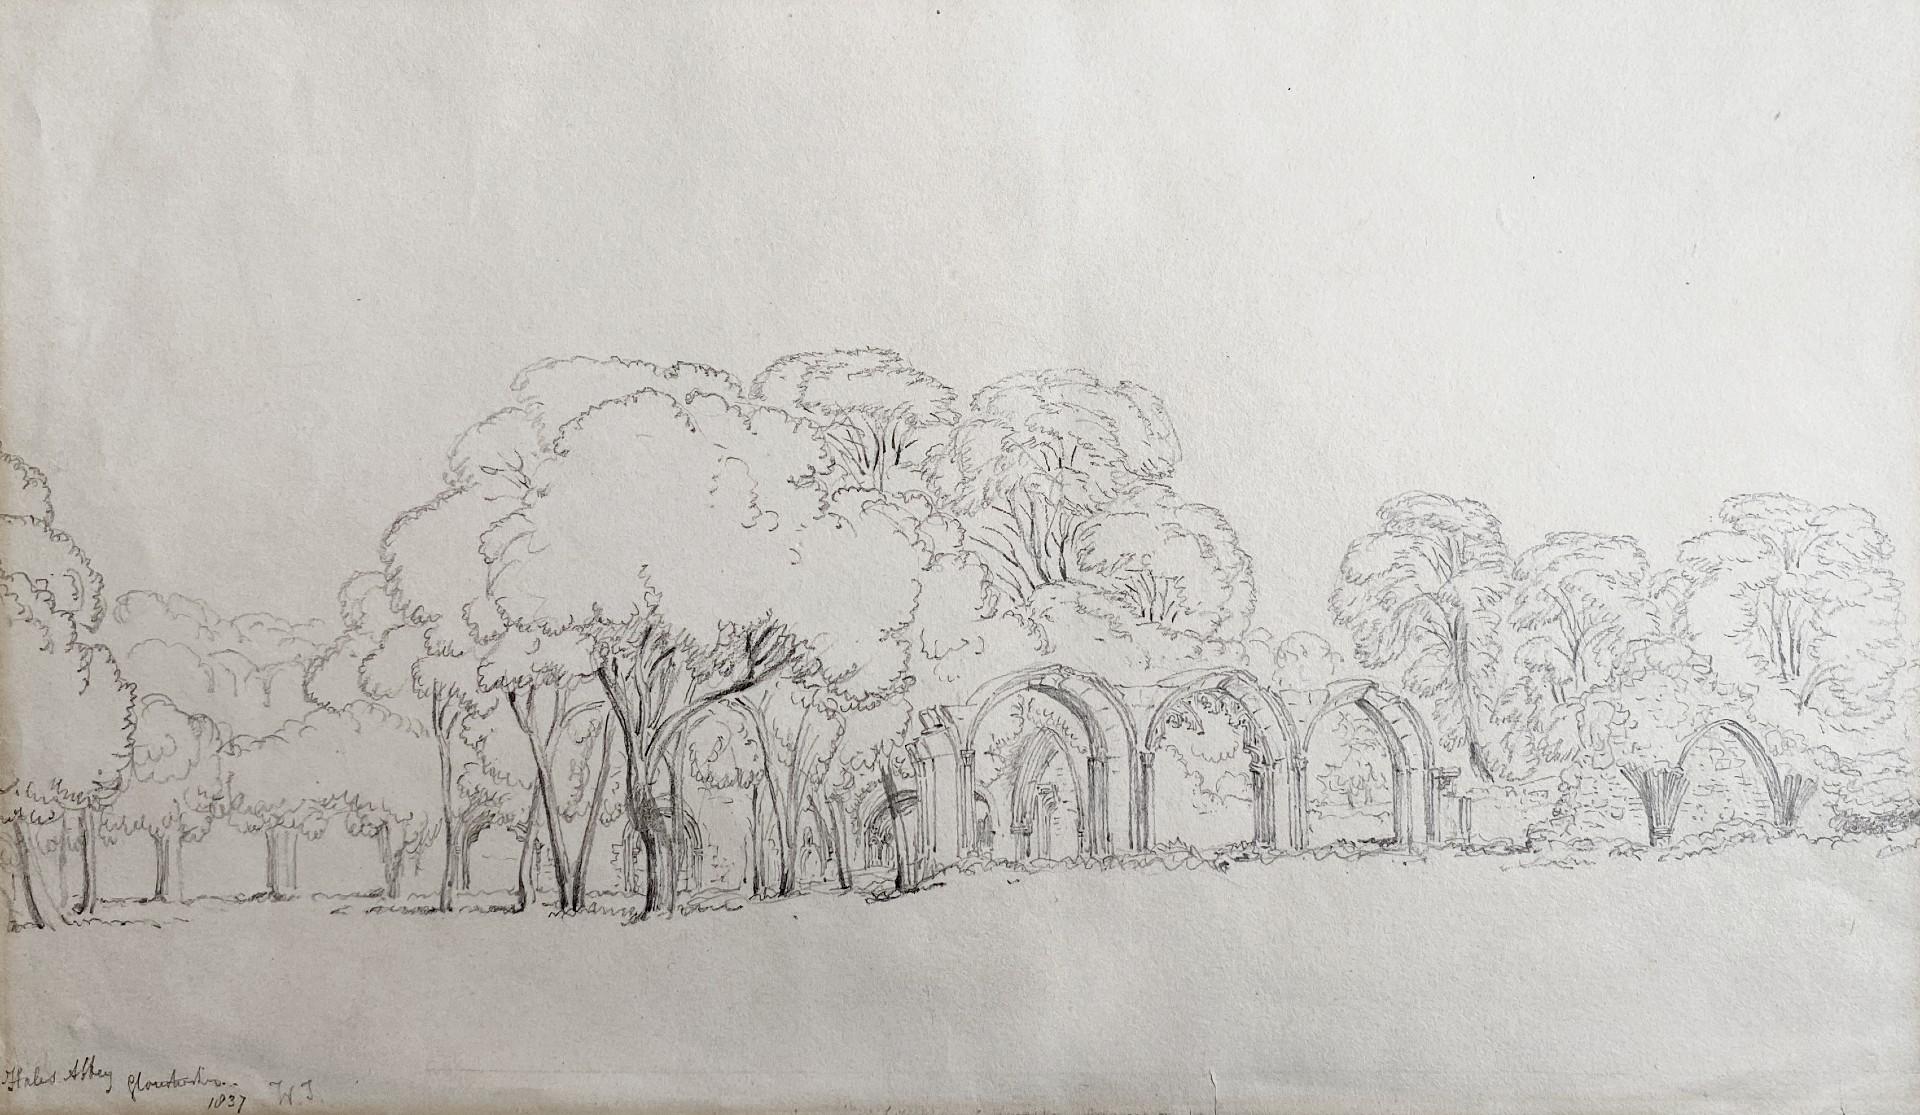 Ruins of Hailes Abbey, 19th century landscape sketch 